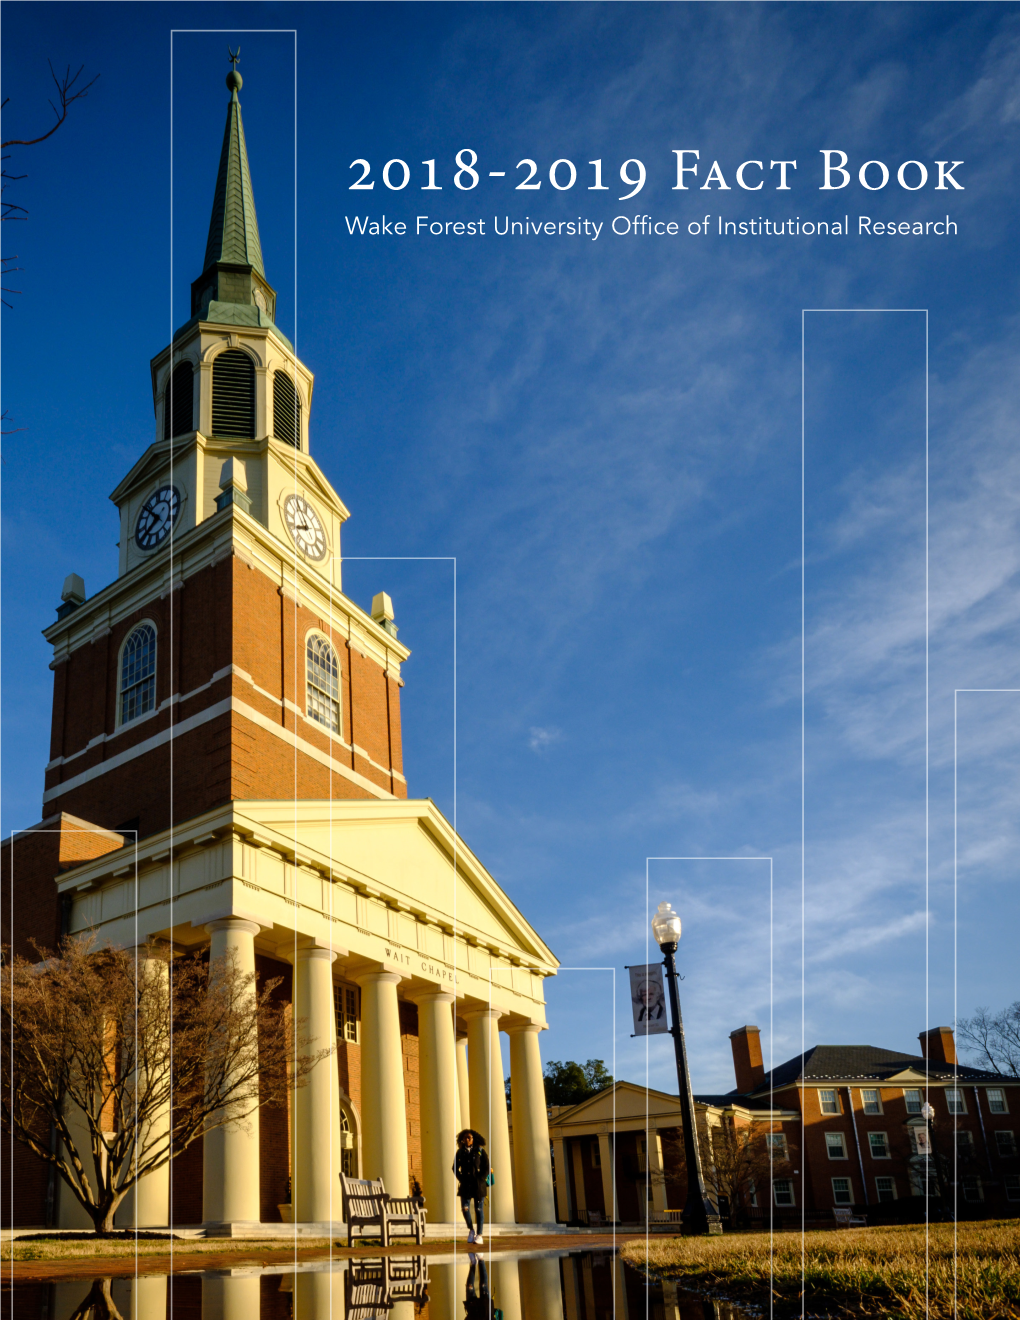 2018-2019 Fact Book Wake Forest University Office of Institutional Research 2018-2019 Fact Book Wake Forest University Office of Institutional Research